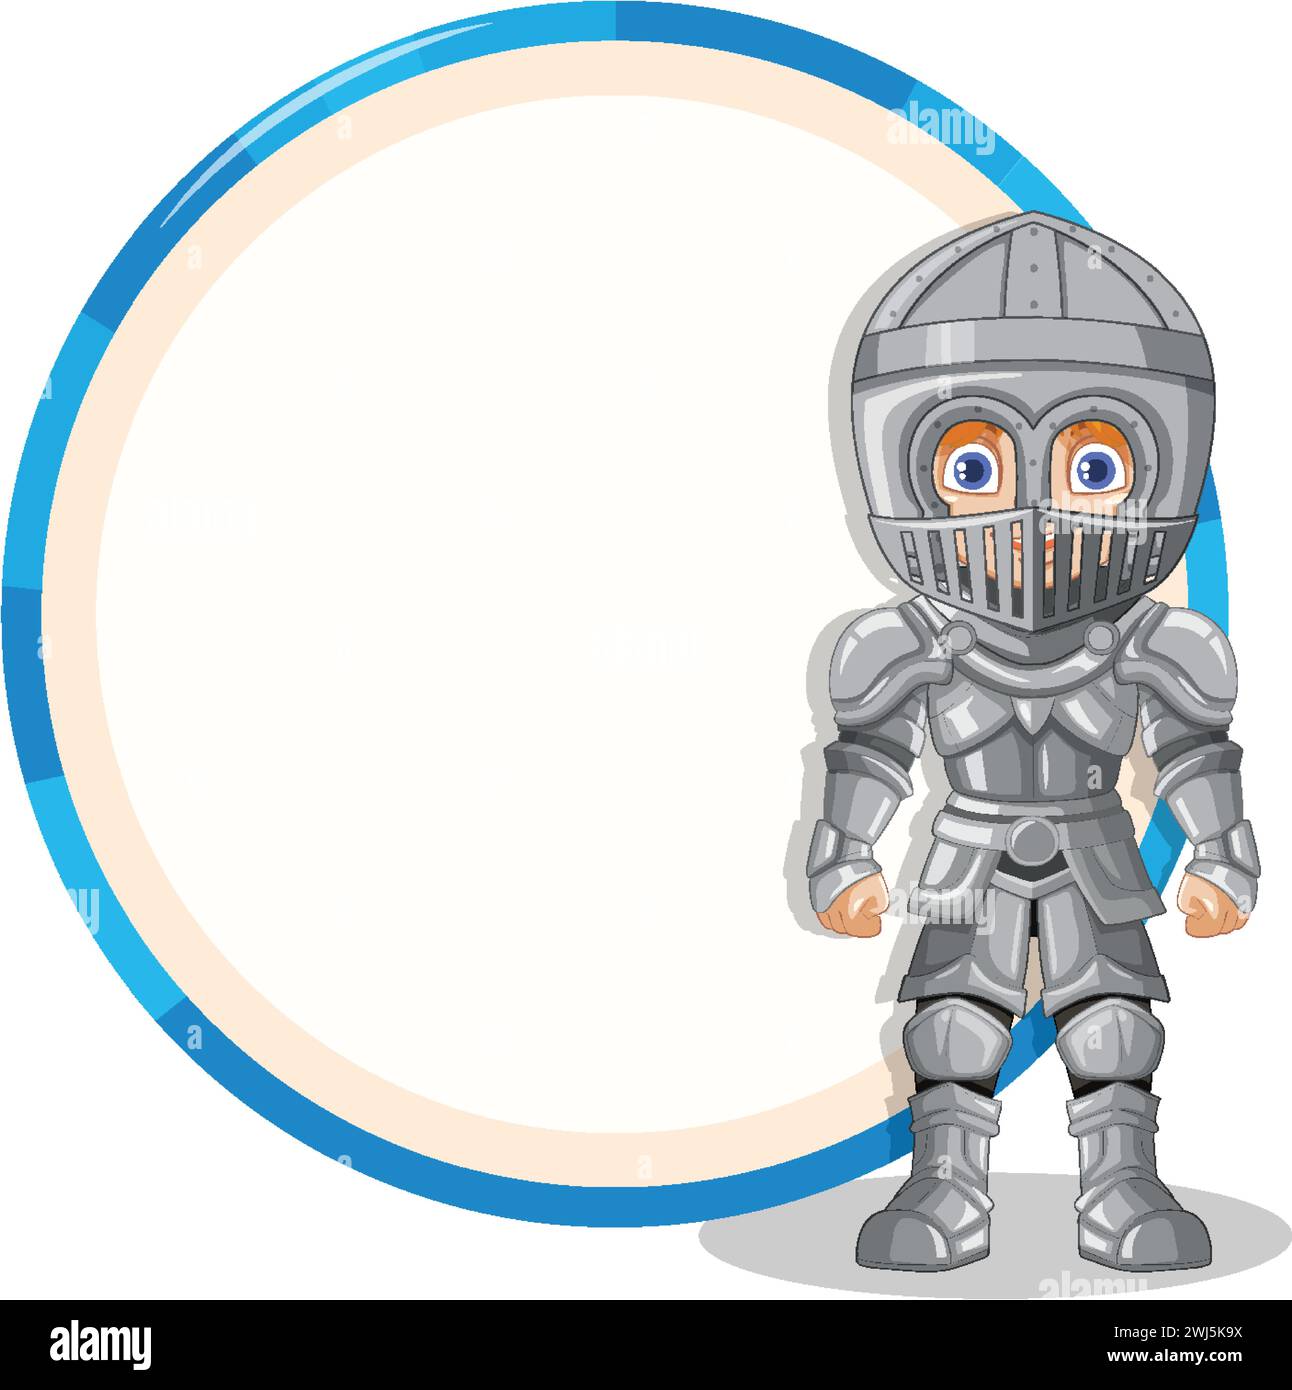 Cartoon knight with a visor and armor standing. Stock Vector